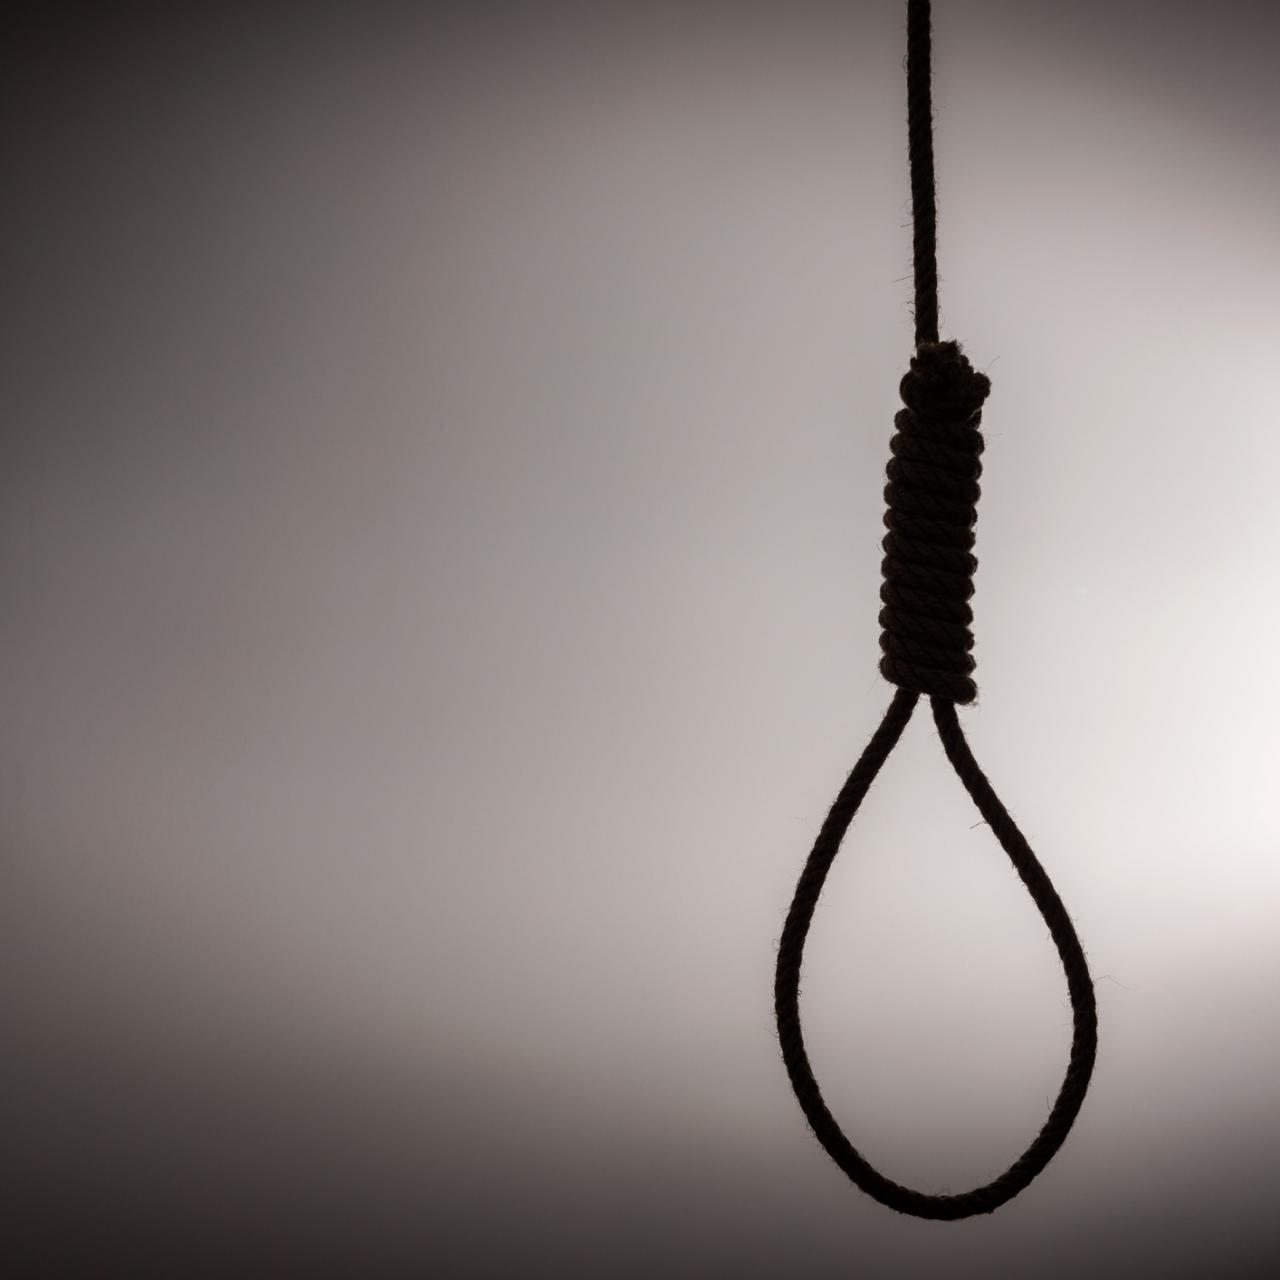 Does The Hangman's Noose Really Possess Magical Occult Powers?, Crime  History